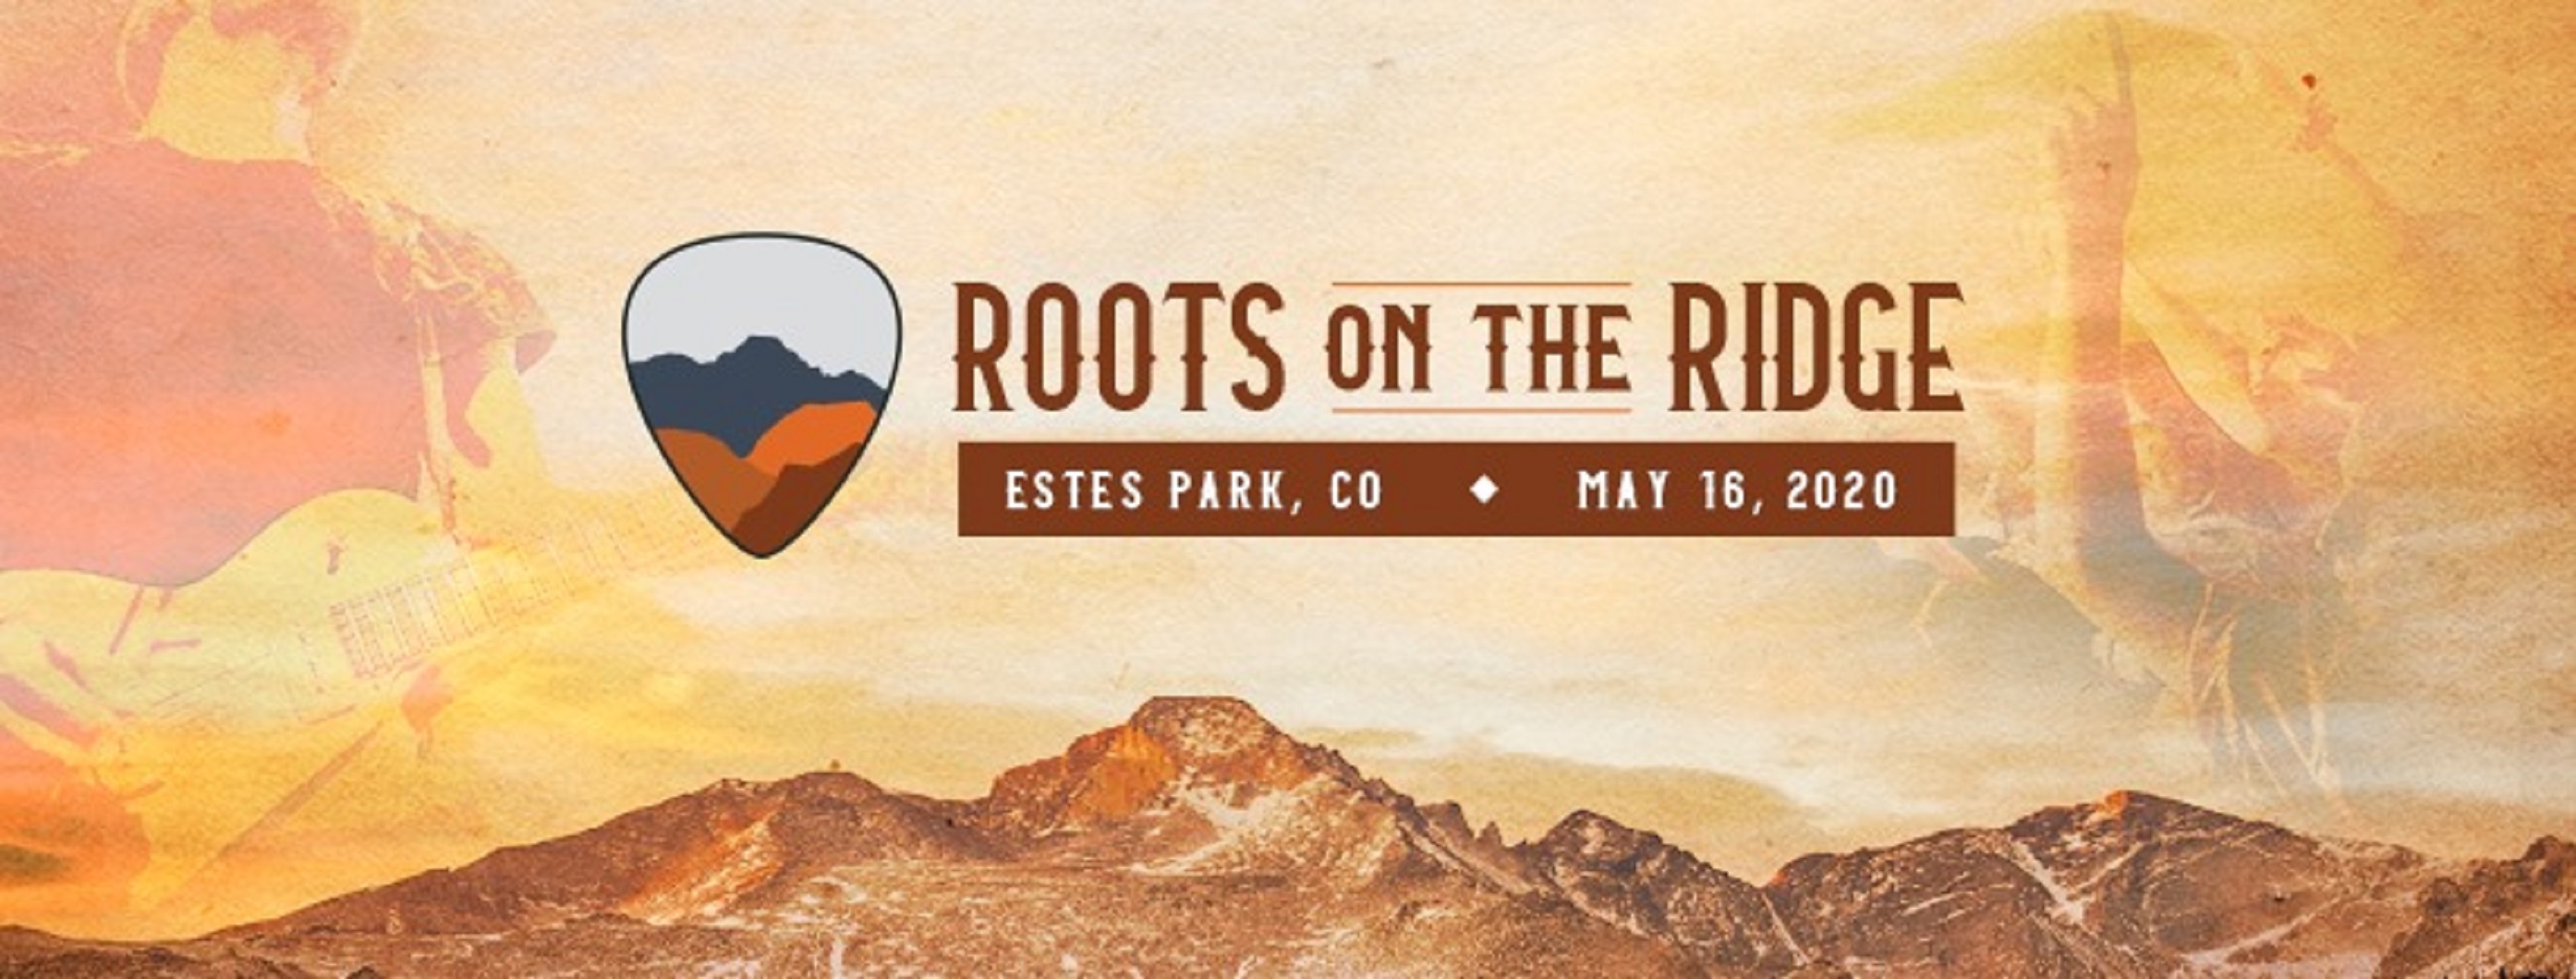 ‘Roots on the Ridge’ music and arts festival coming to Estes Park in May 2020